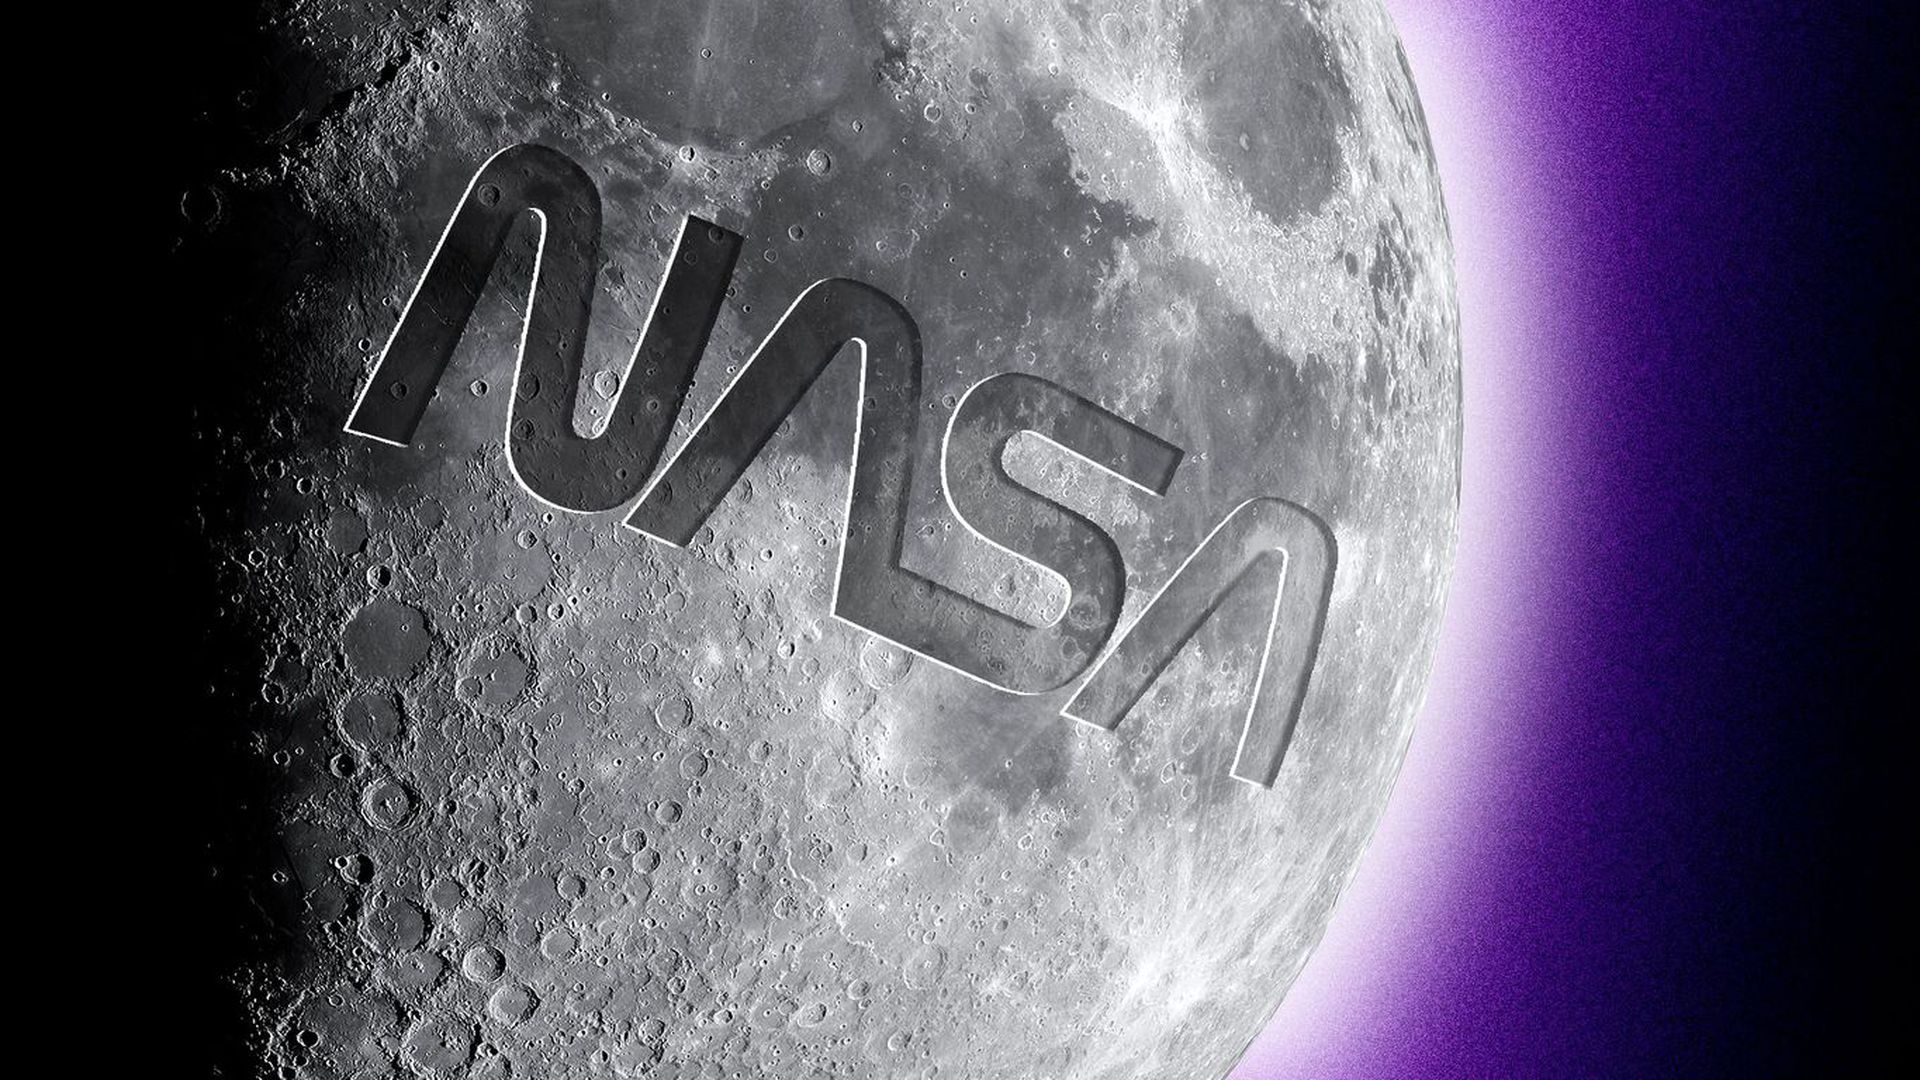 An artist's rendering of the NASA logo on the lunar surface.